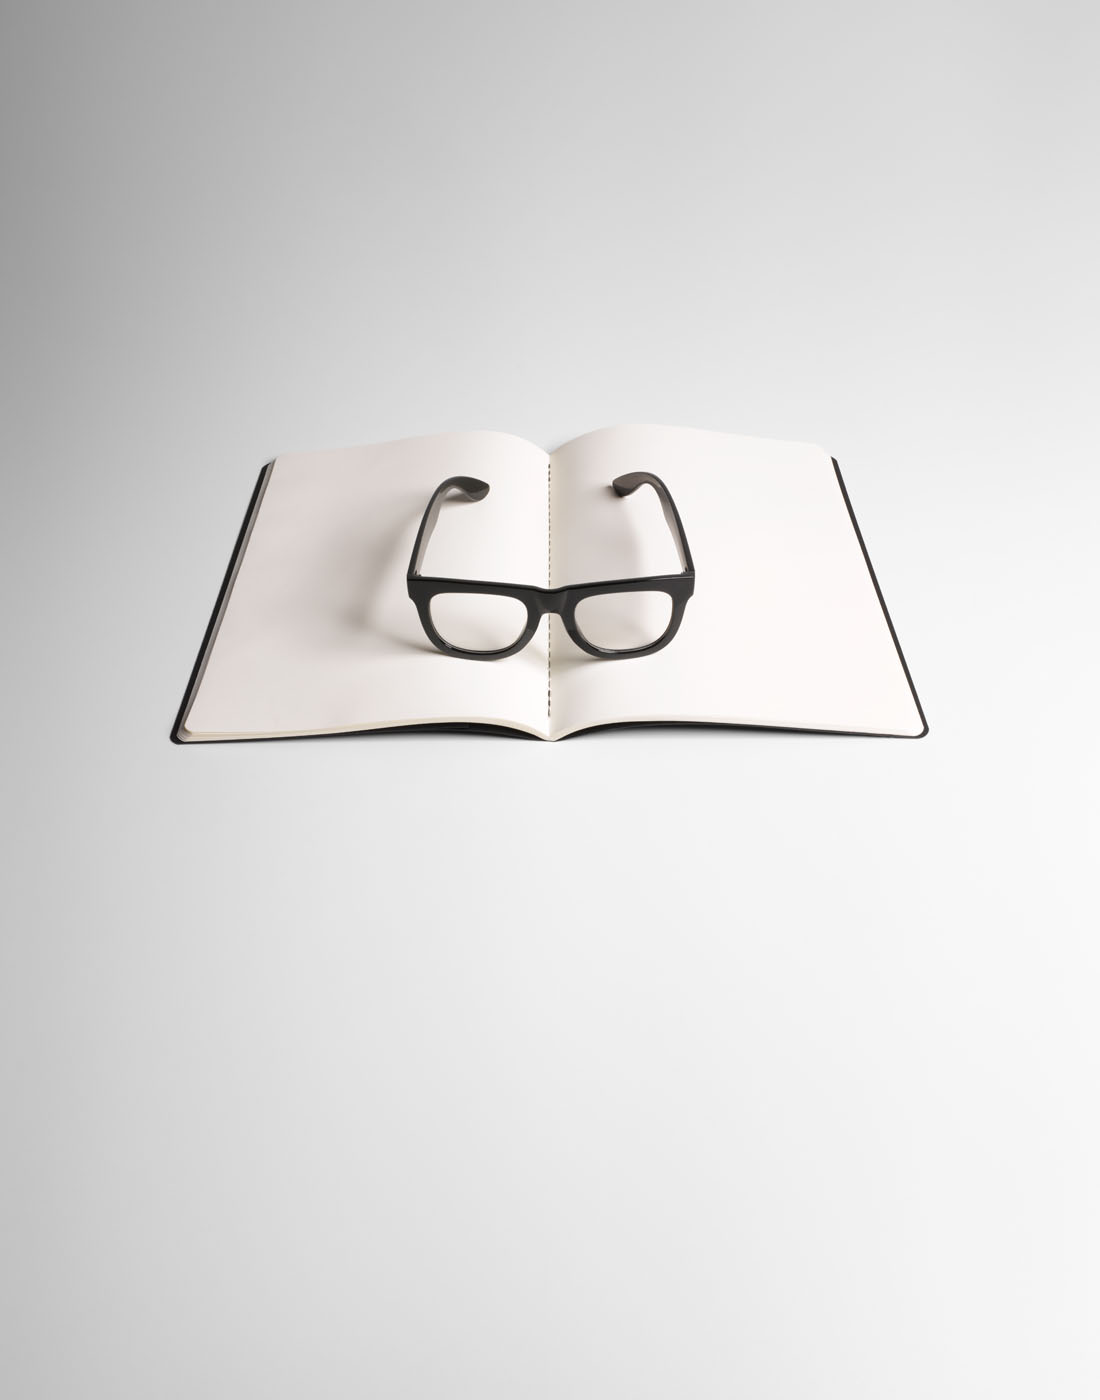 Reading glasses on notepad by Alexander Kent London based still life and product photographer.